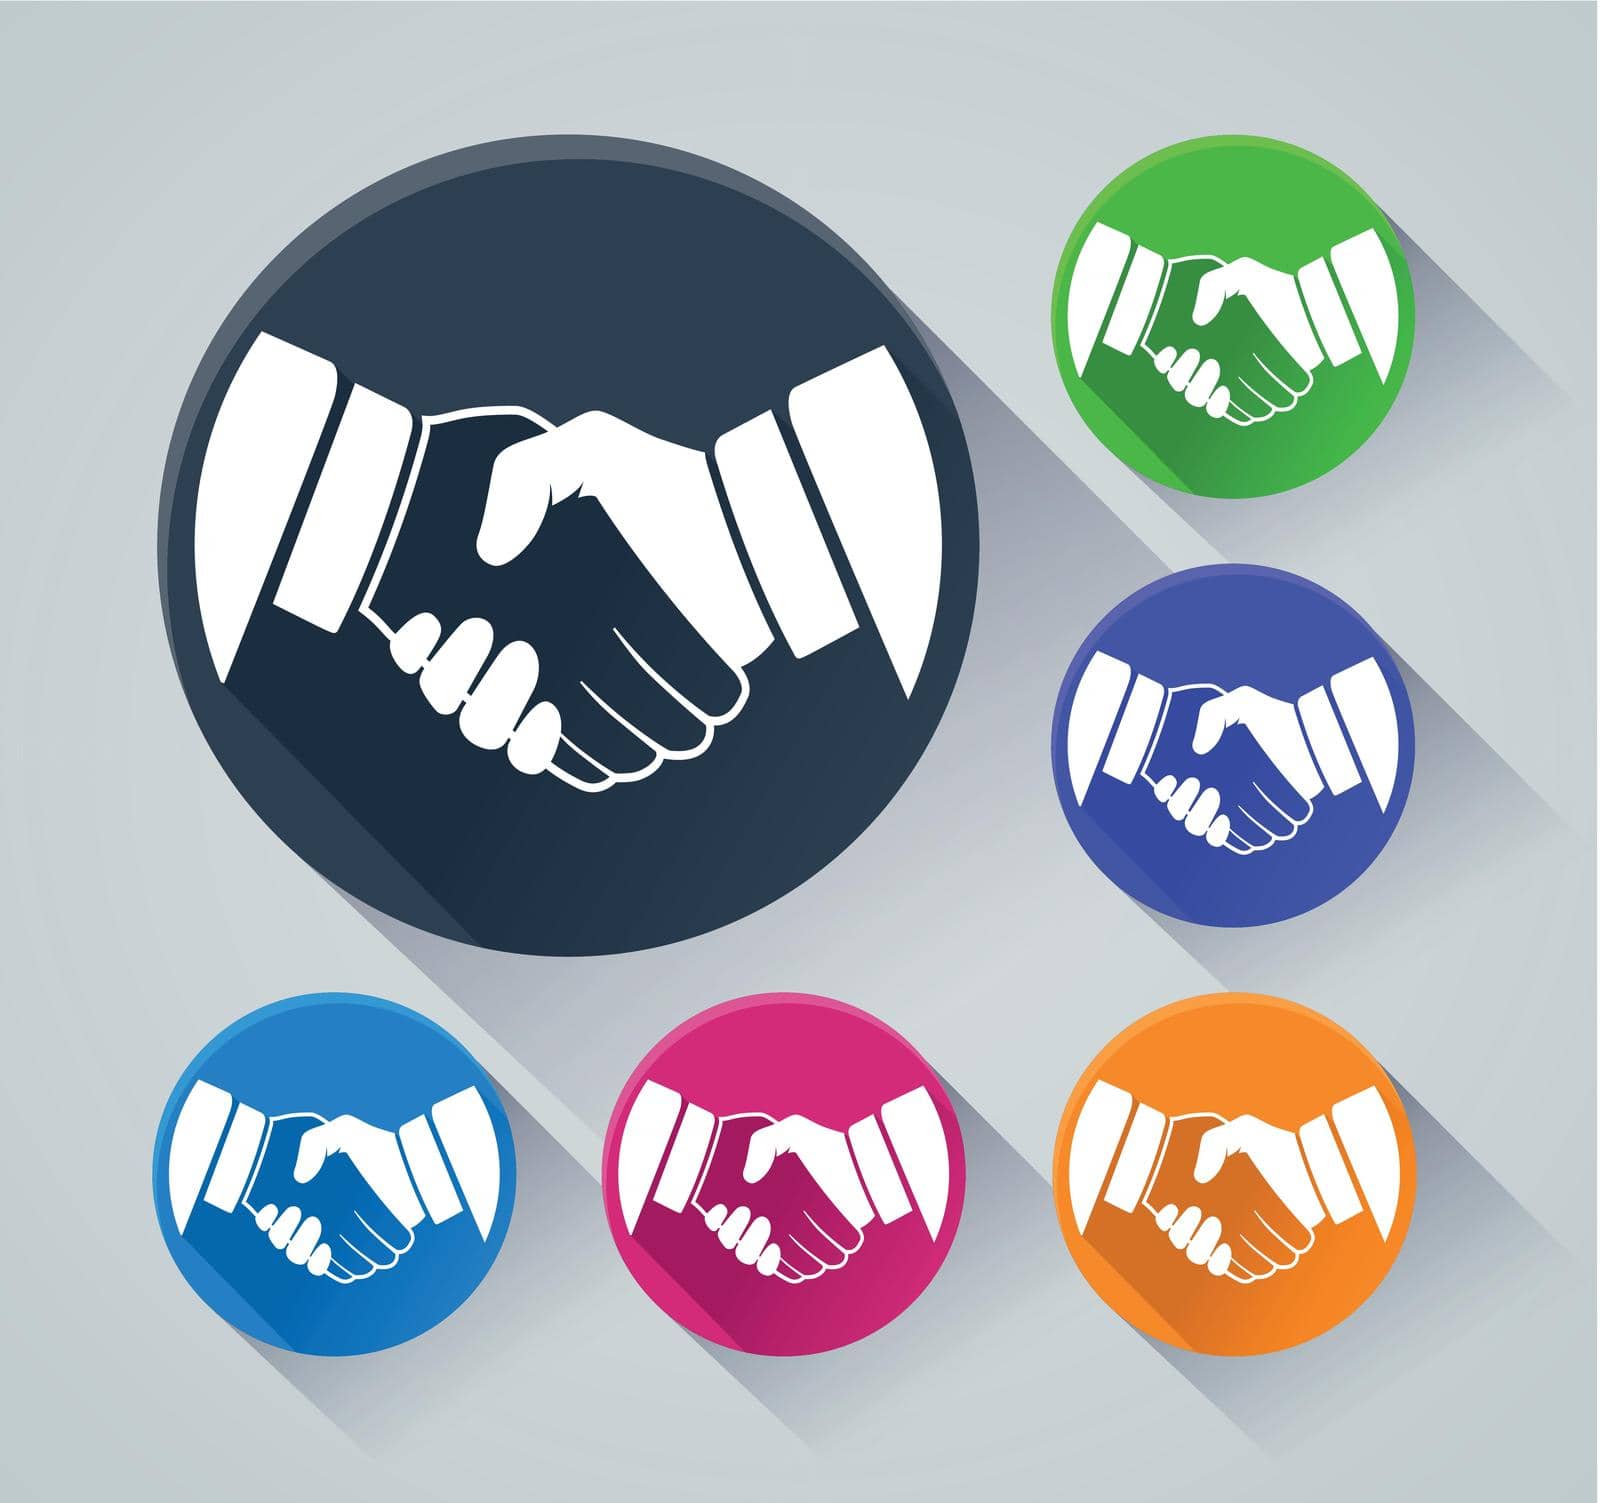 Illustration of handshake circle icons with shadow